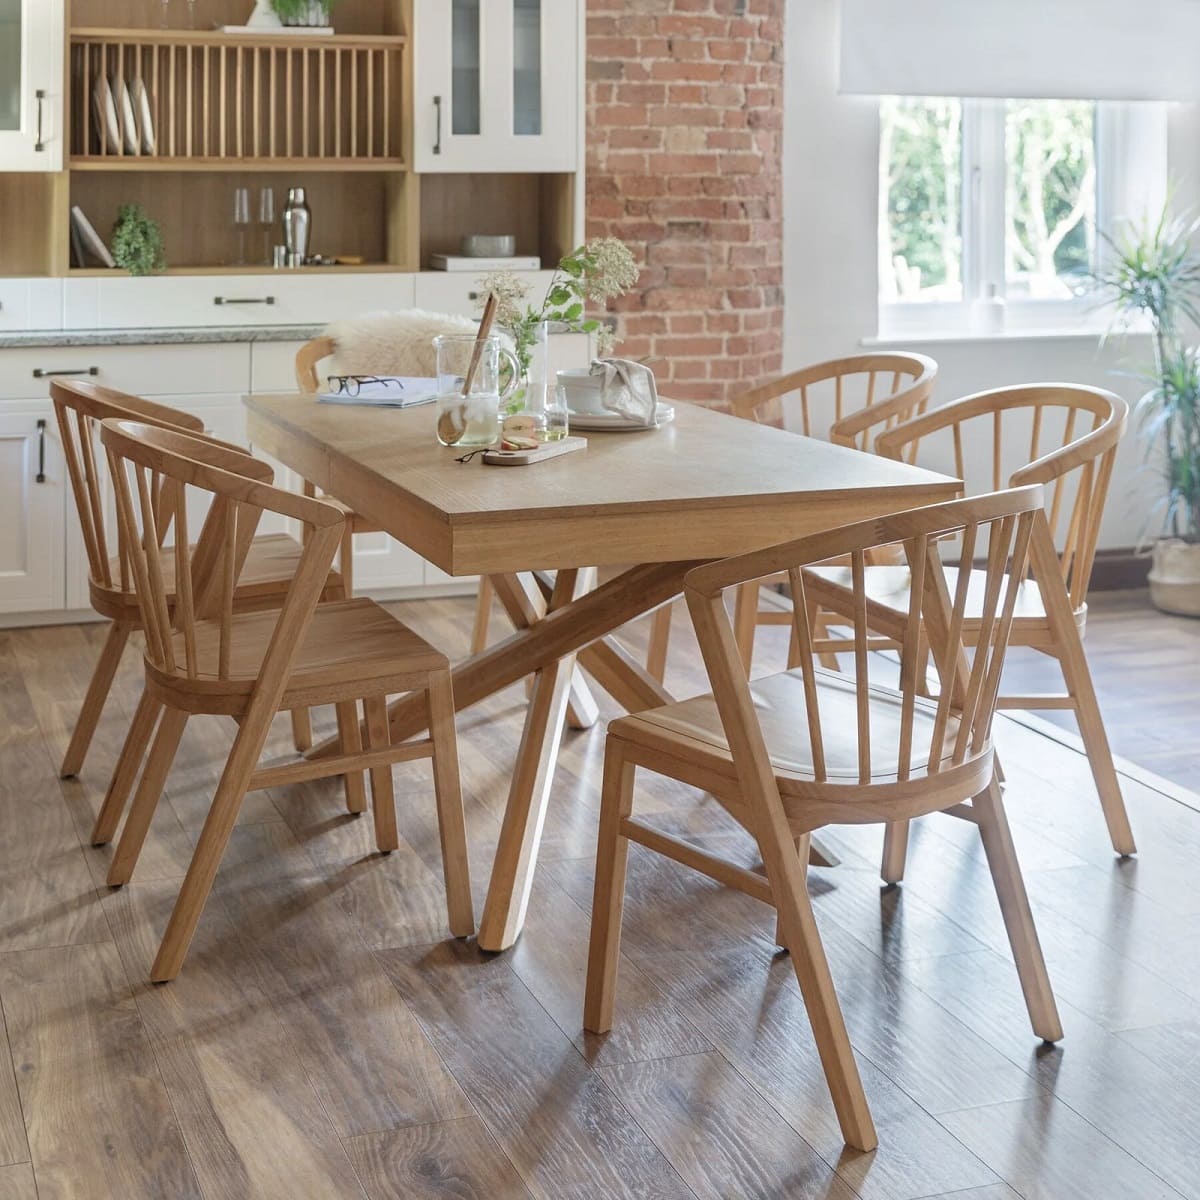 How To Match Chairs To A Dining Table